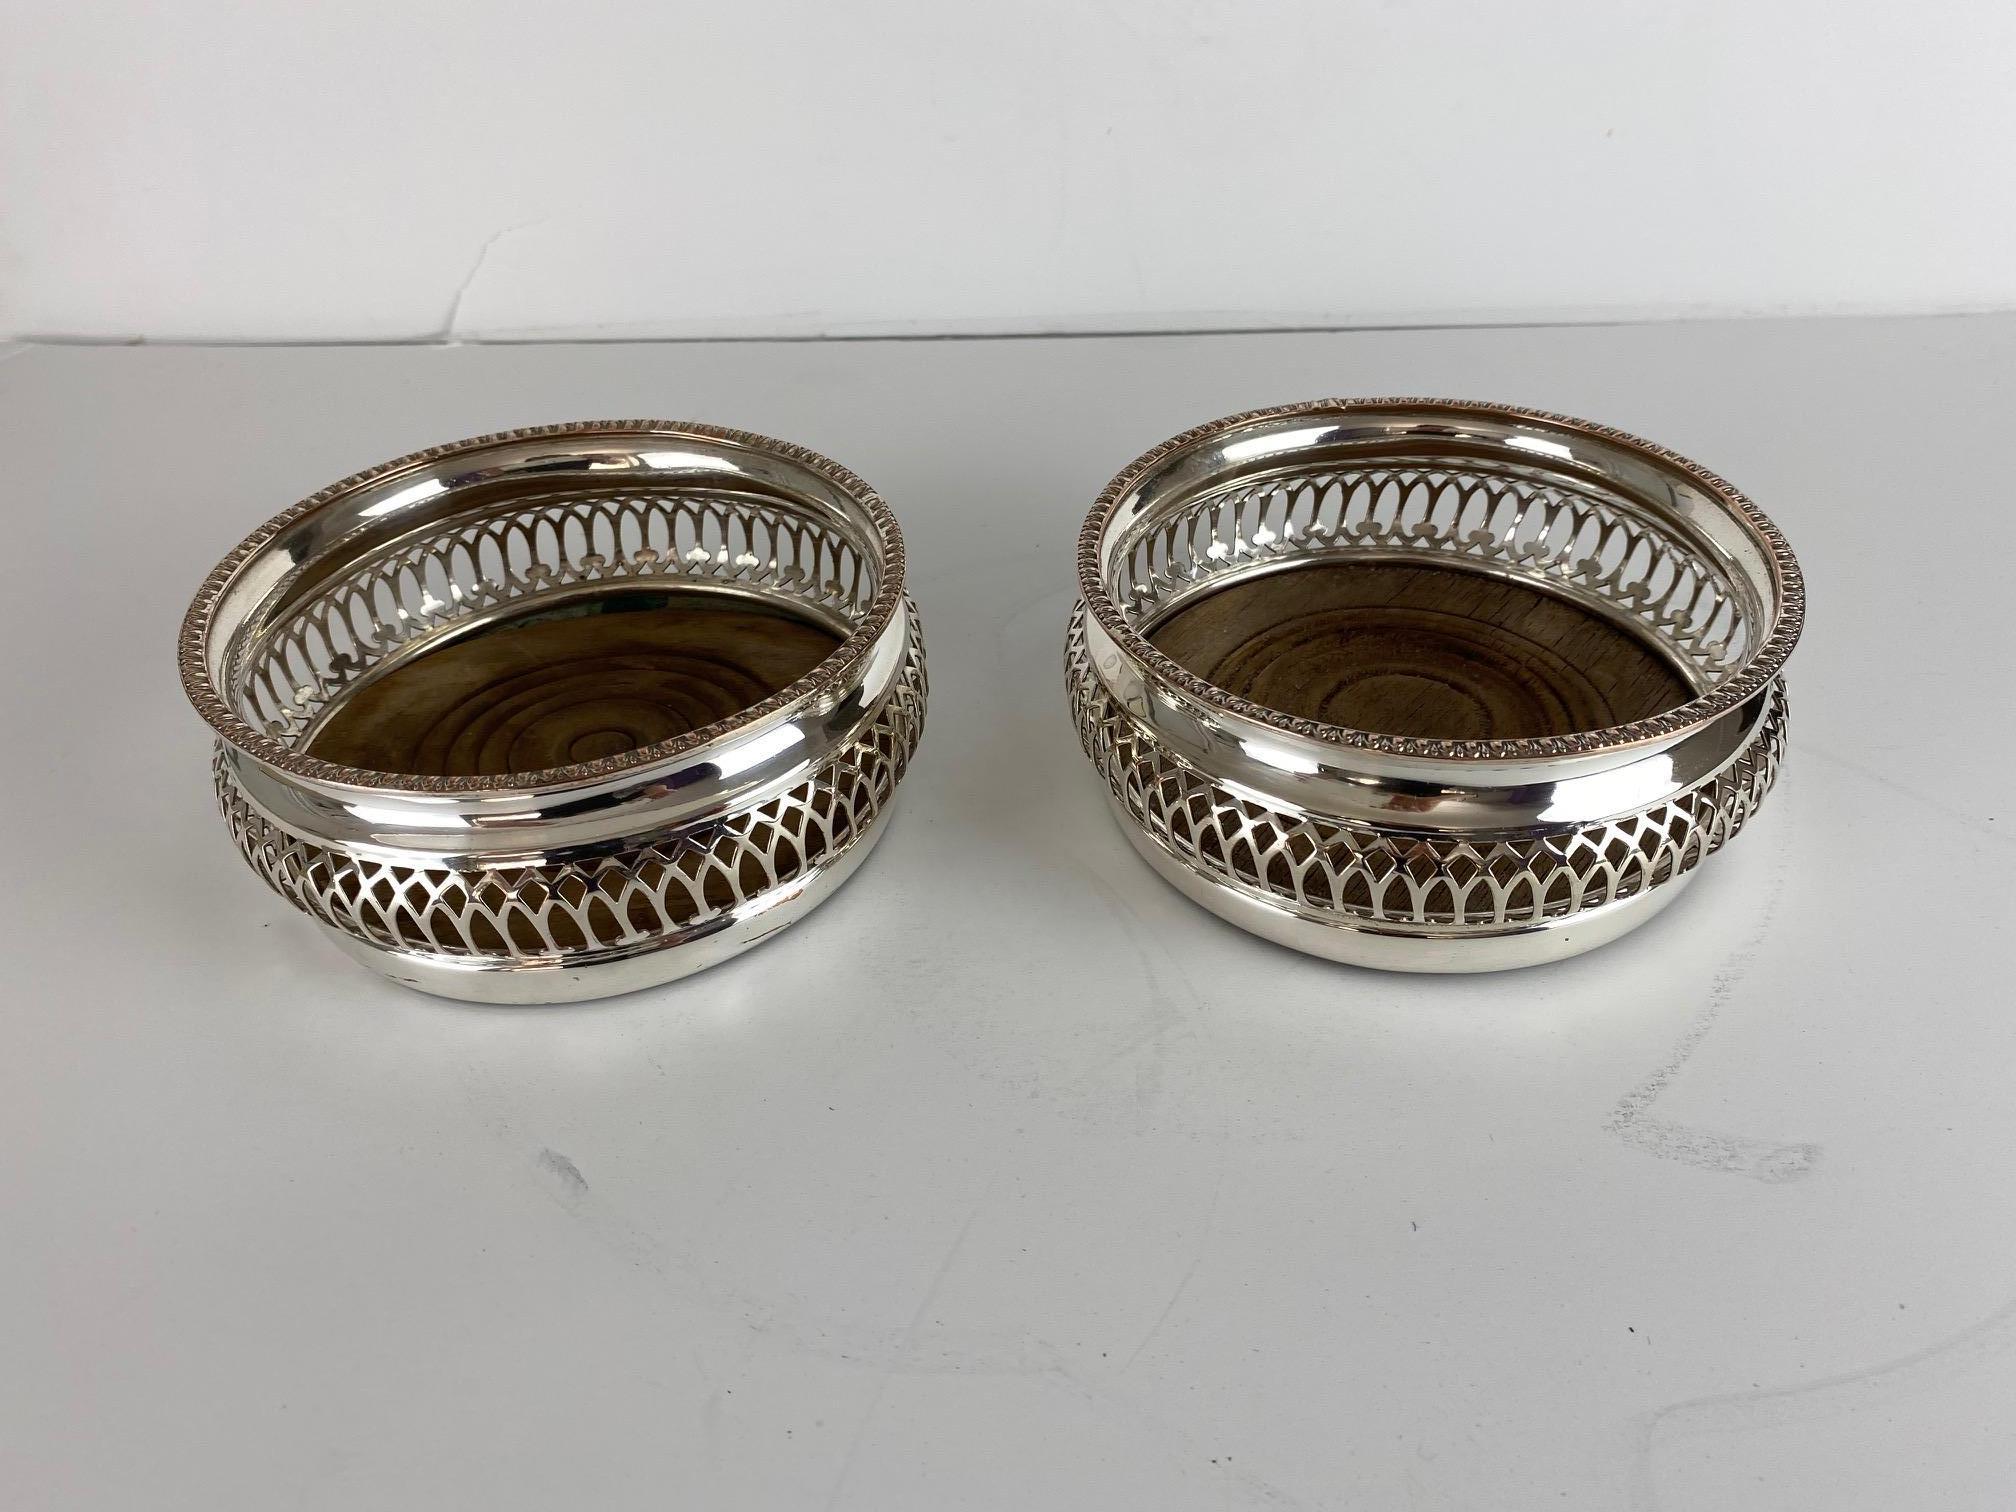 A pair of 19th century English silver-plated coasters circa 1850s.